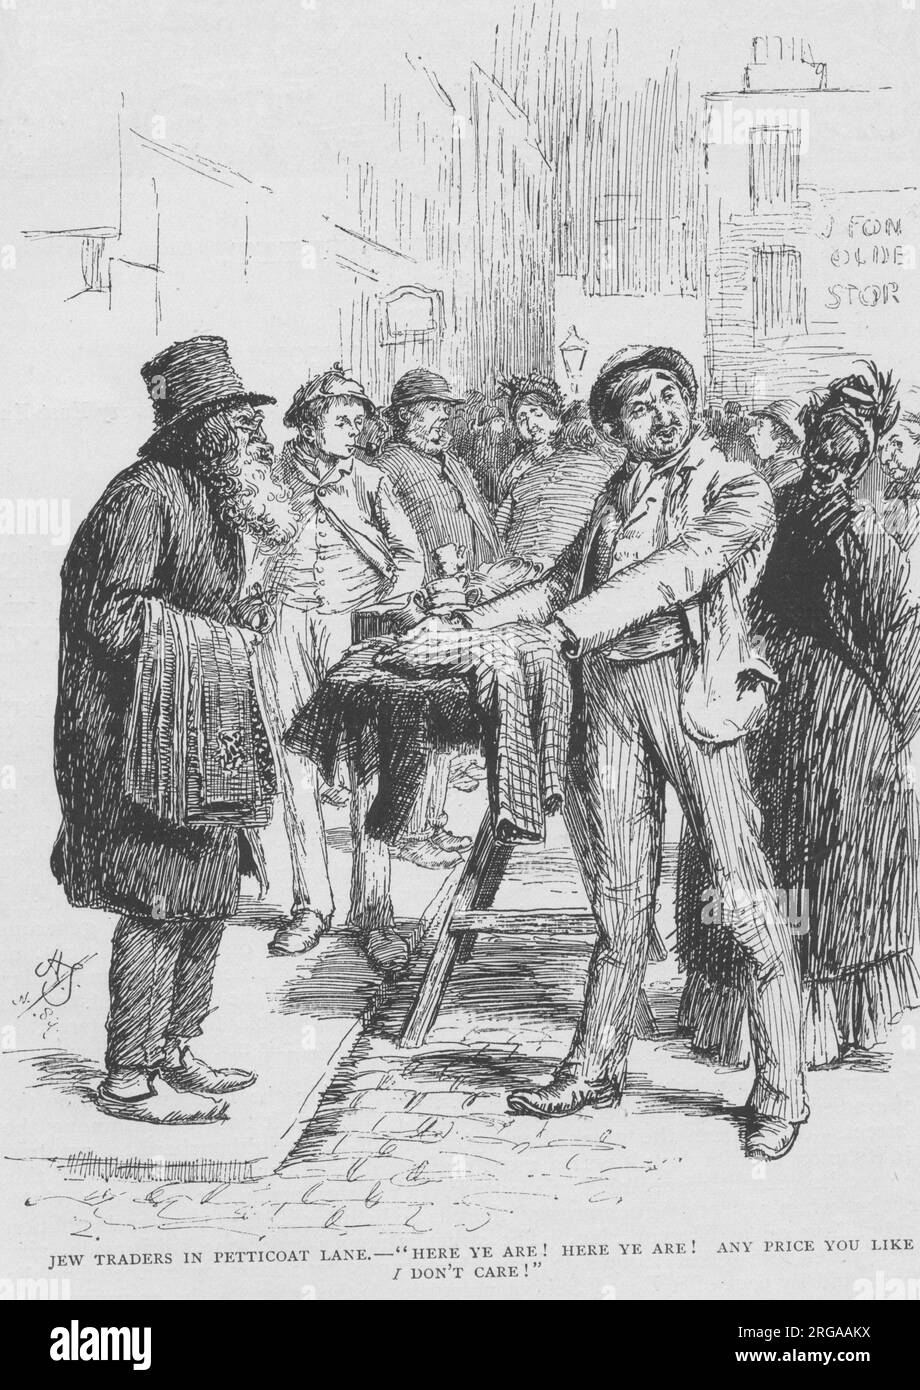 Jewish traders in Petticoat Lane (Middlesex Street) in the East End of London. 'Here ye are! Here ye are! Any price you like, I don't care!' Stock Photo